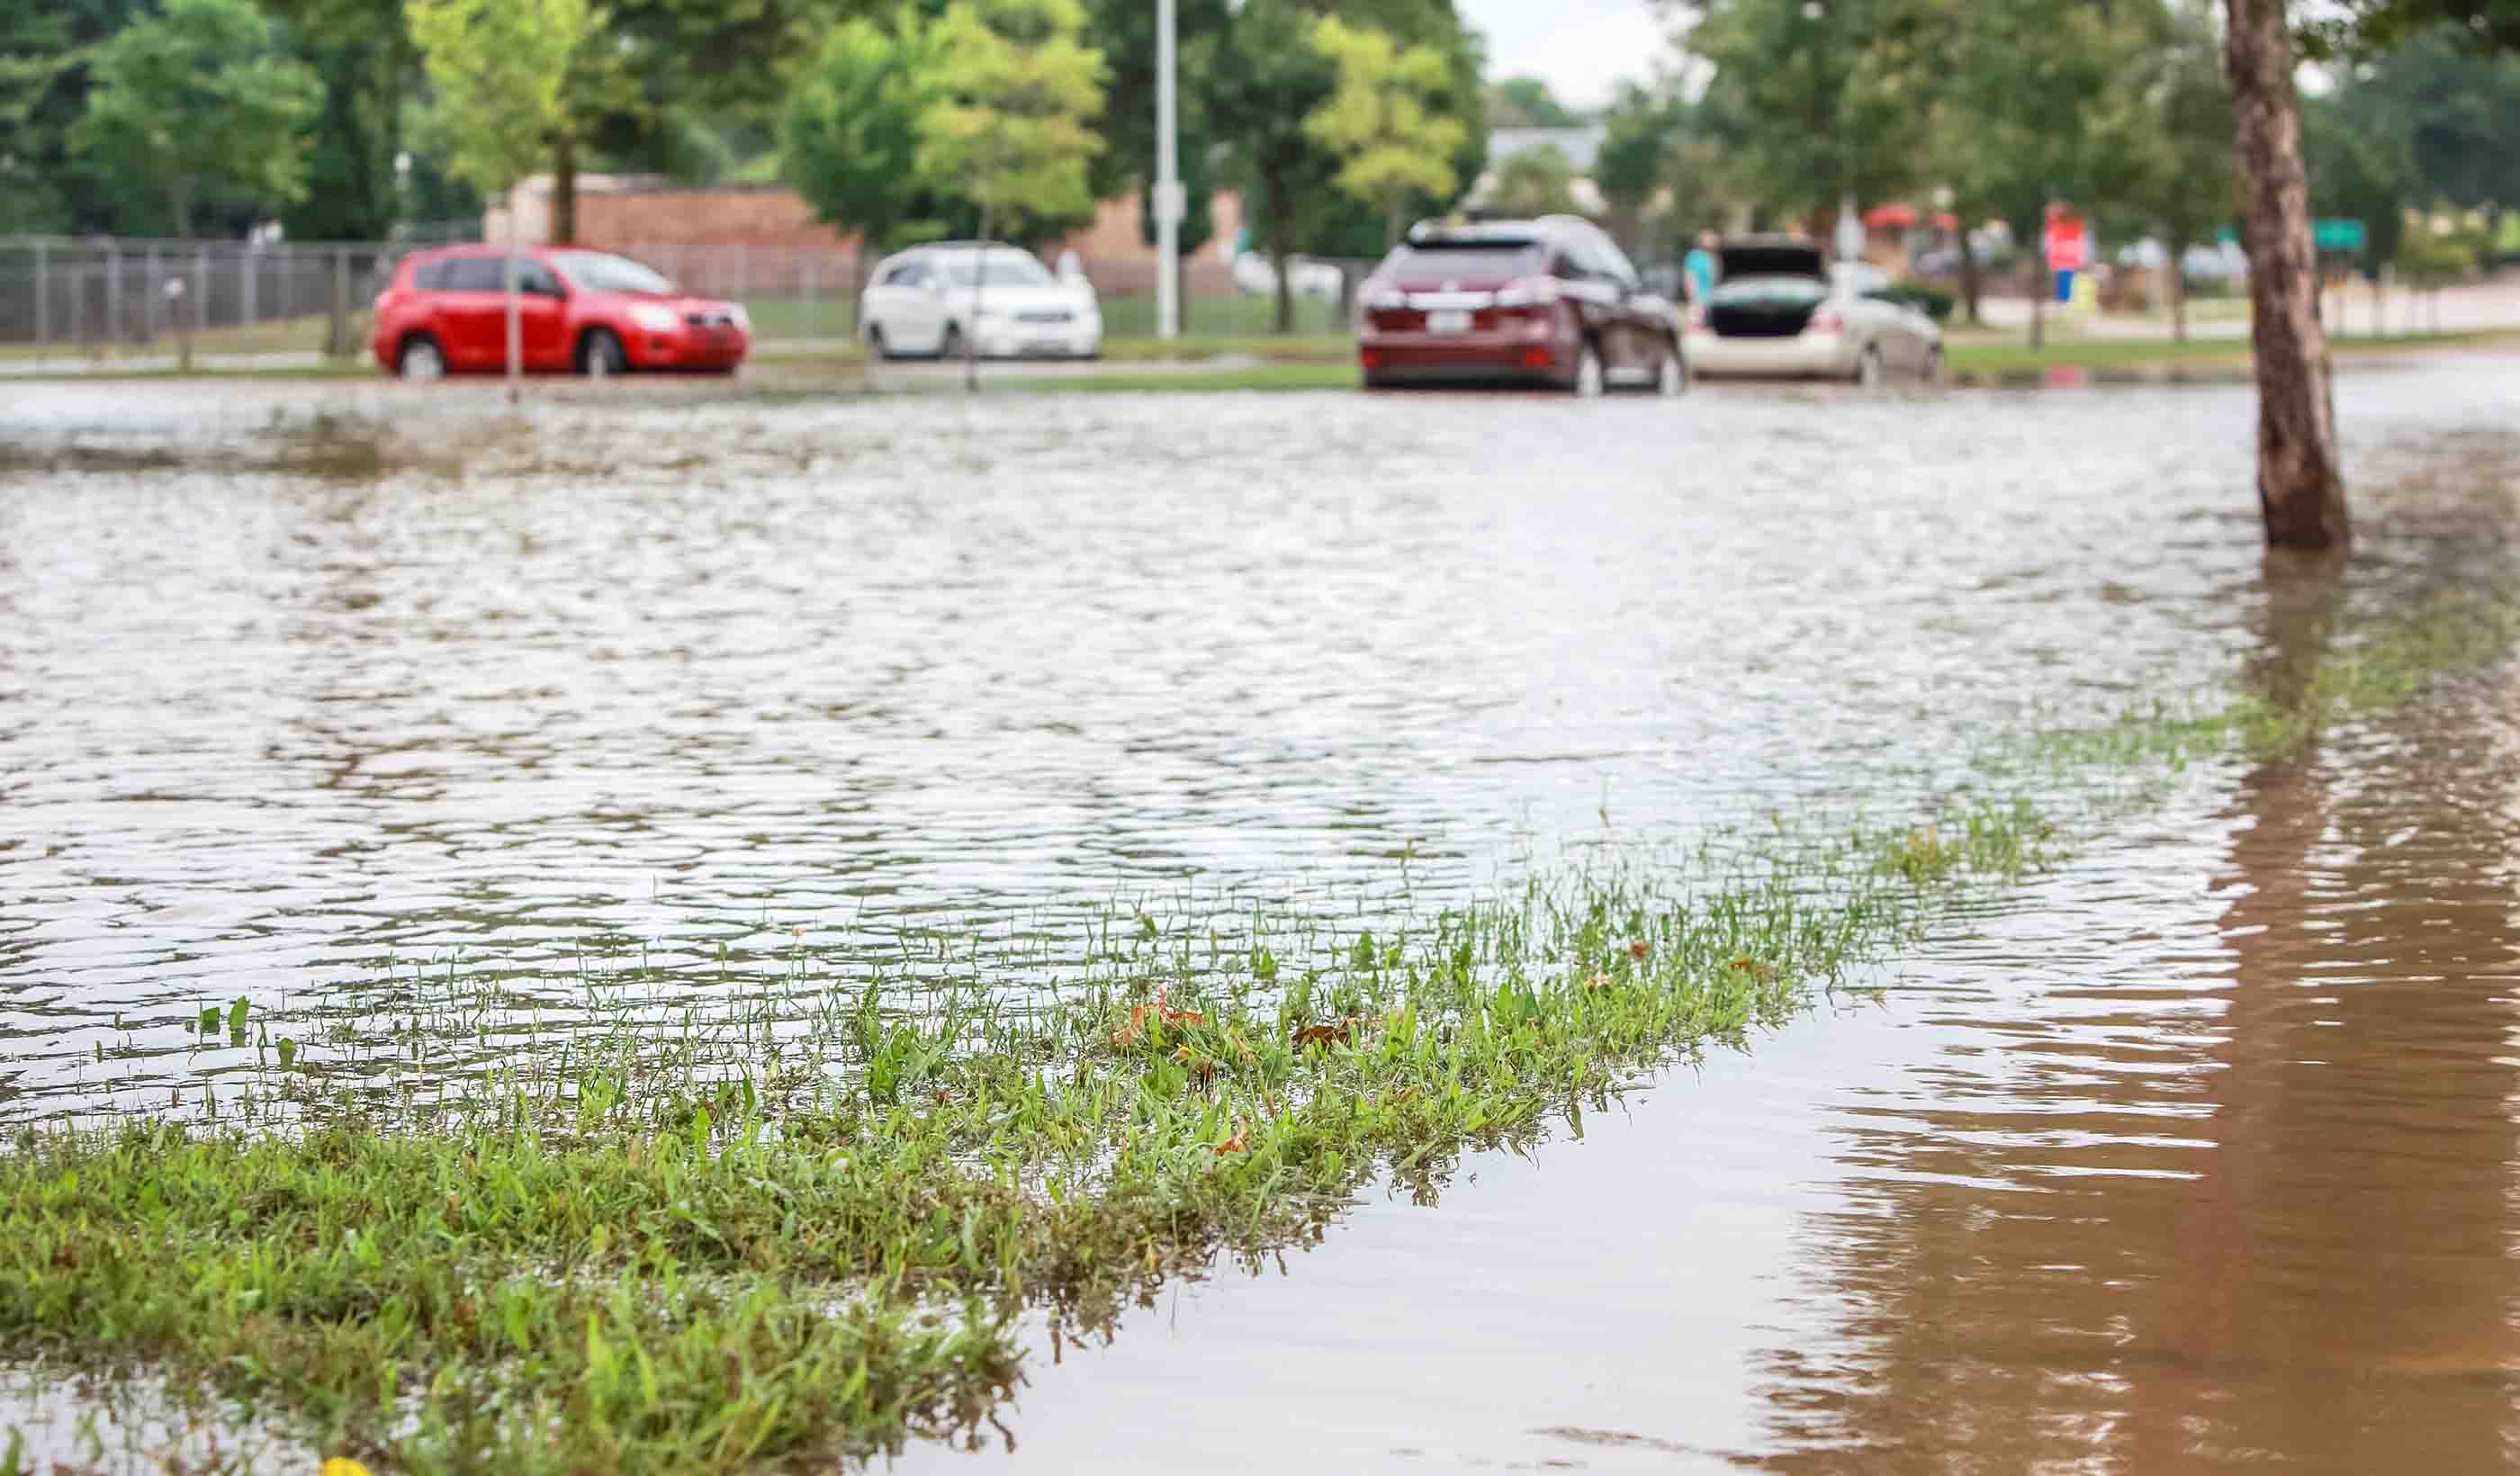 A New Way – Applying Asset Management to a Stormwater Program